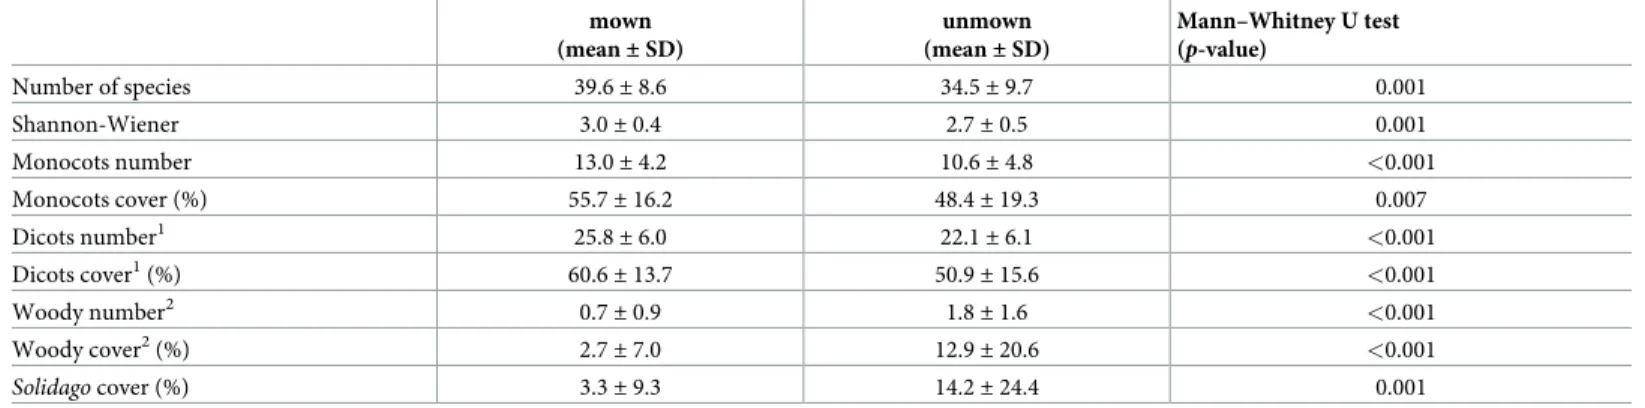 Table 1. Comparison of vegetation parameters estimated from mown and unmown sites.